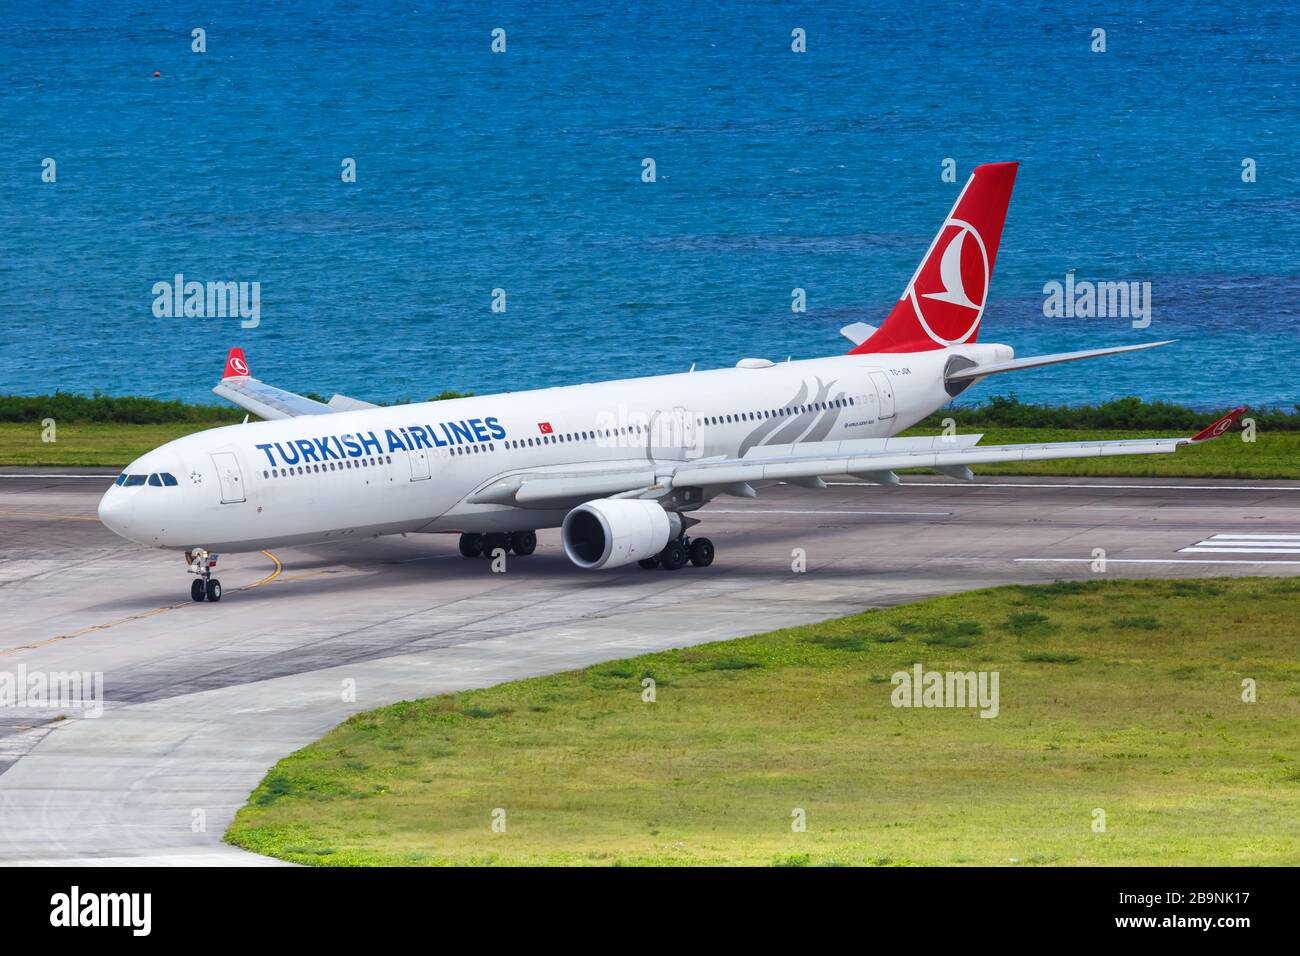 Mahe, Seychelles – February 8, 2020: Turkish Airlines Airbus A330 airplane at Mahe airport (SEZ) in the Seychelles. Airbus is a European aircraft manu Stock Photo